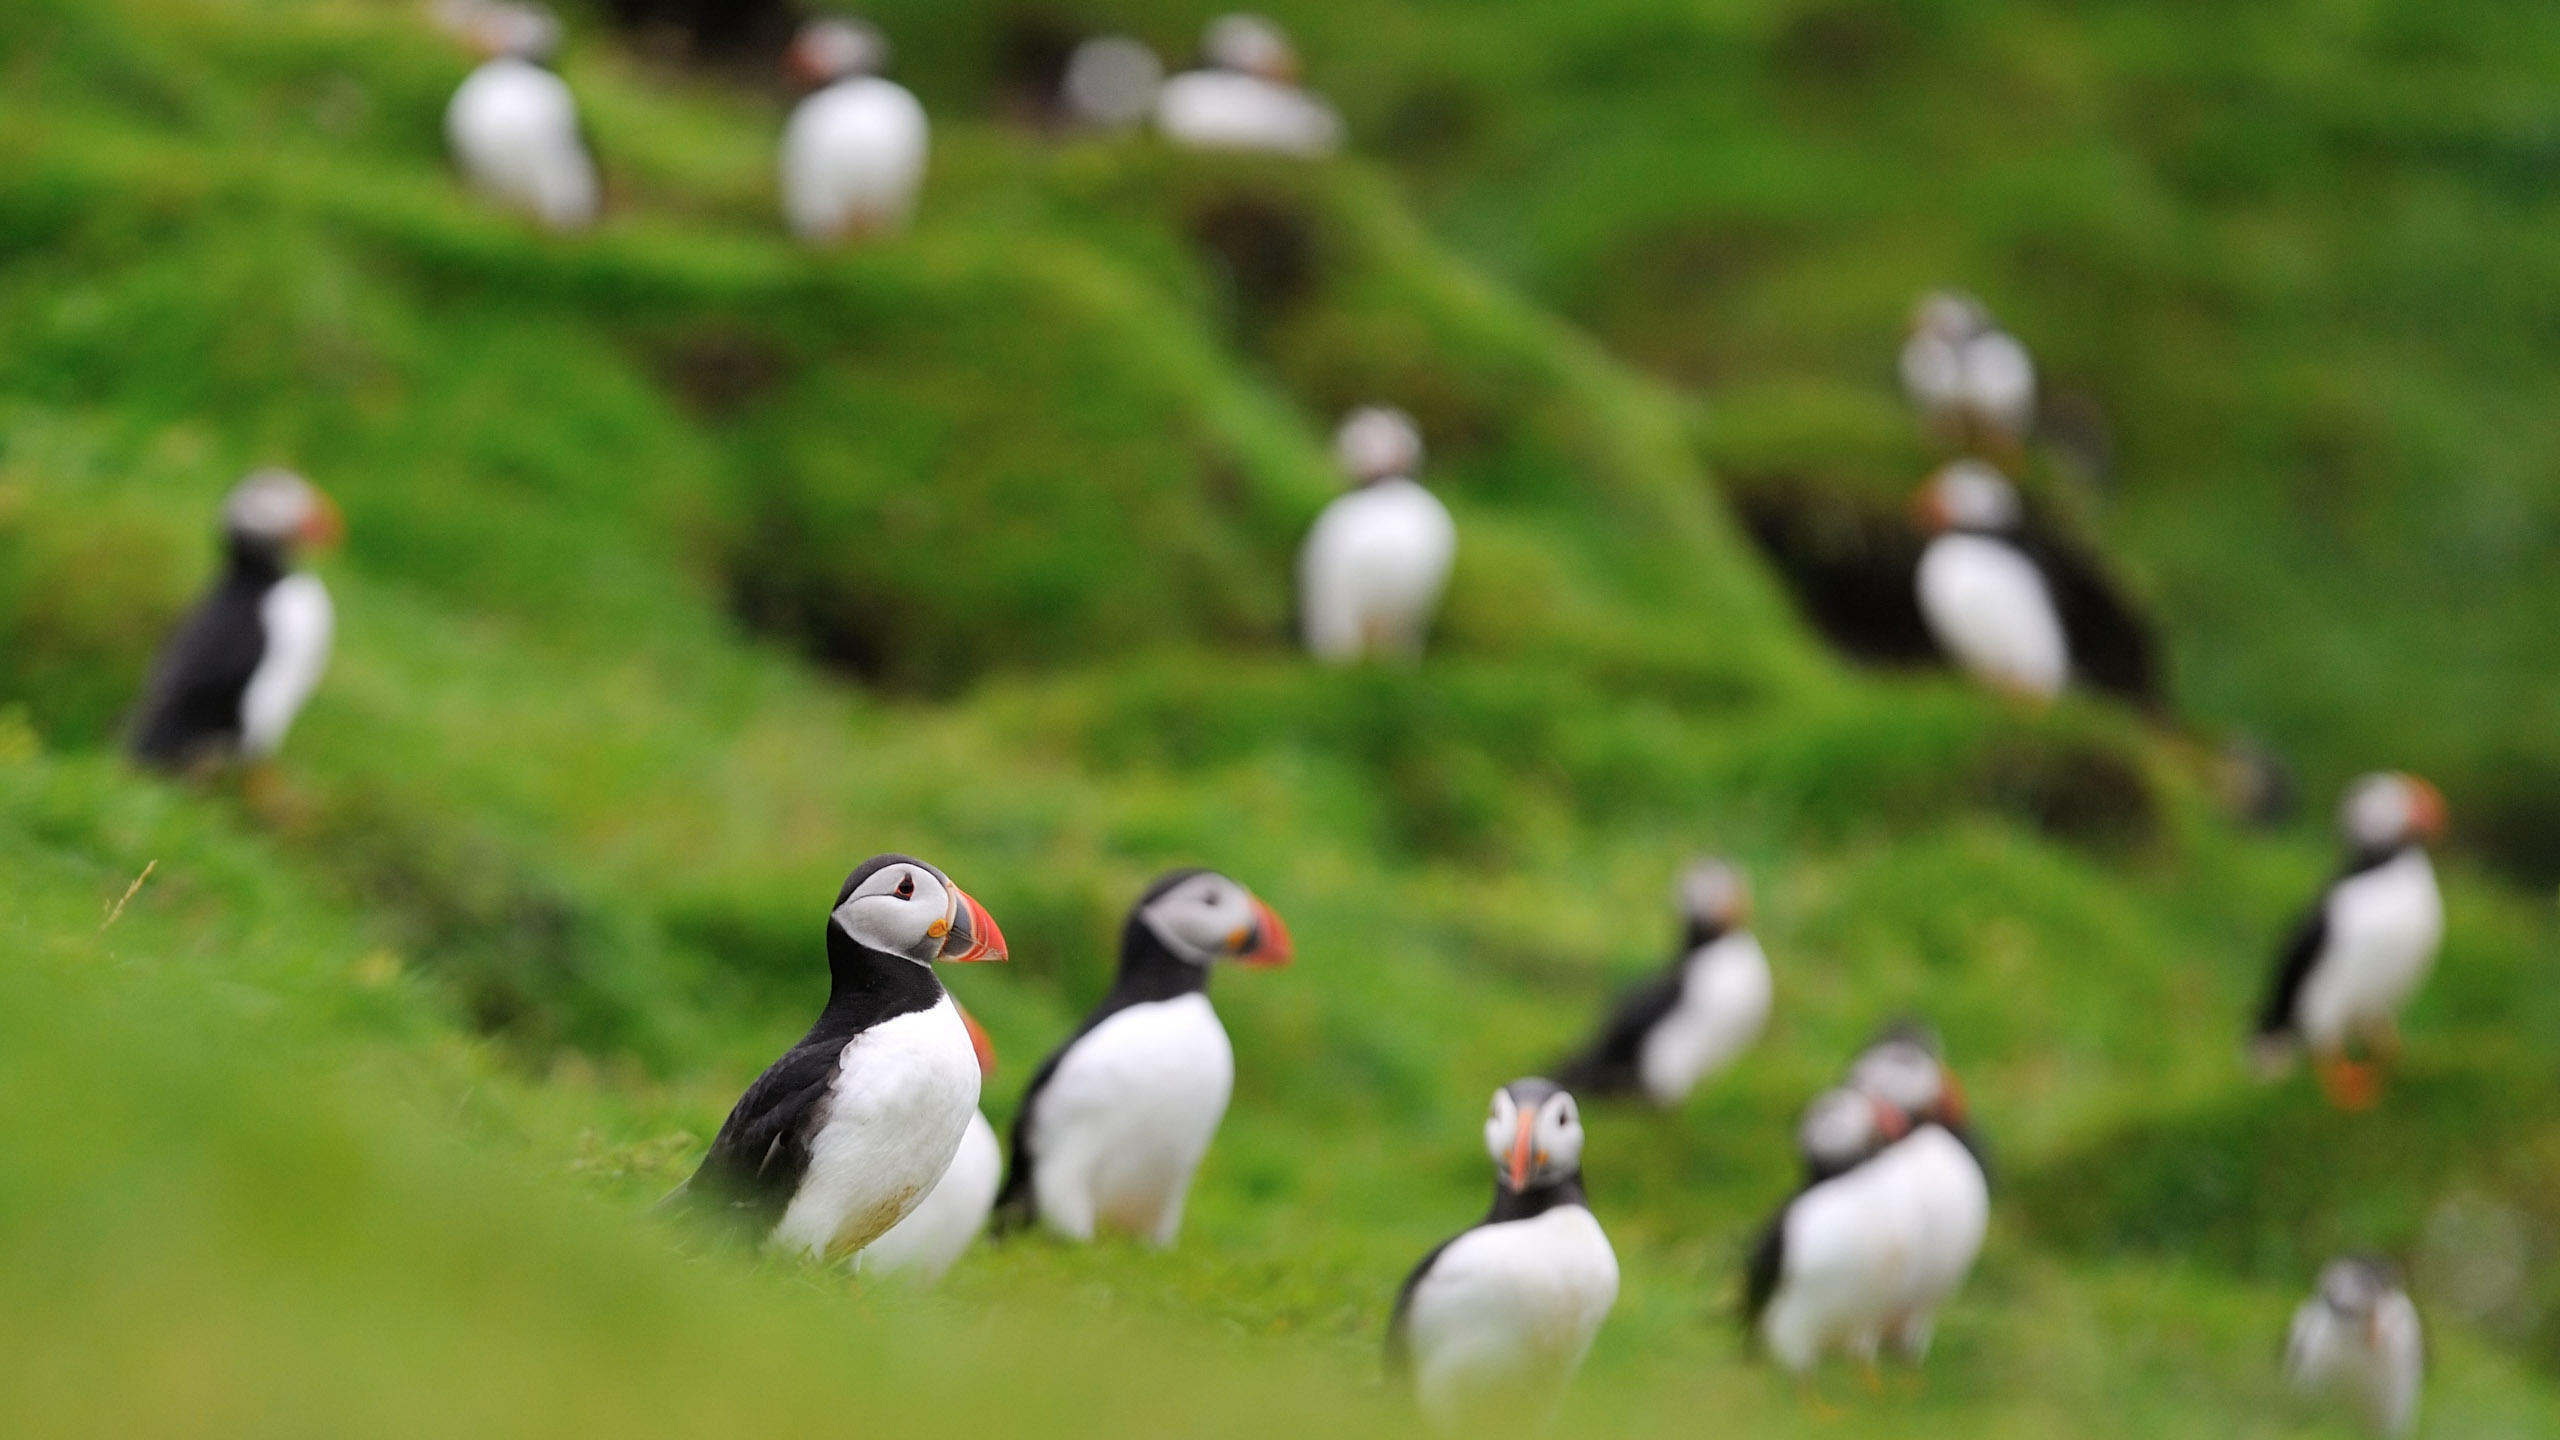 You can go observe the endearing Atlantic puffin, but time may be